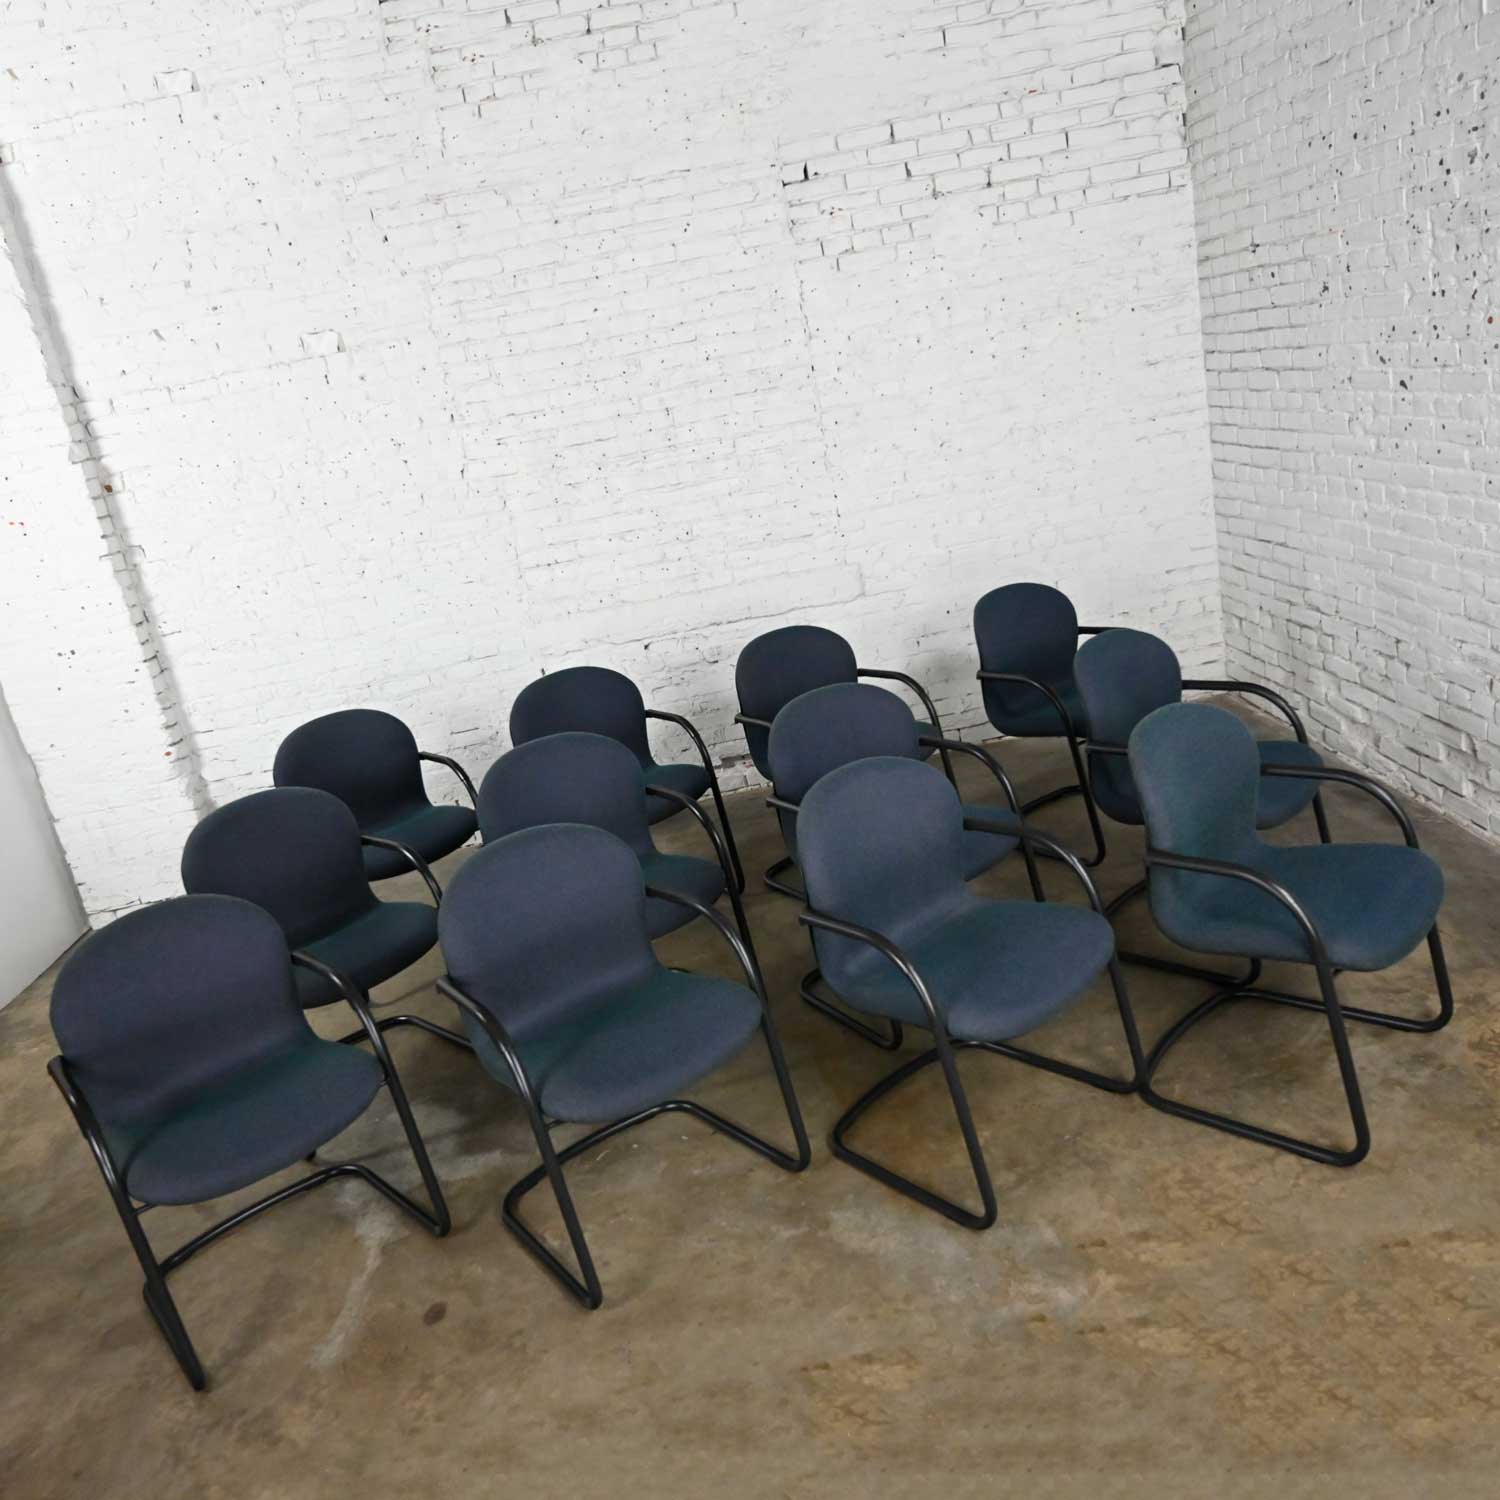 Vintage Modern Bulldog Armed Side Chairs by McCoy & Fahnstrom for Knoll Black Cantilever Base Blue Fabric Set of 12